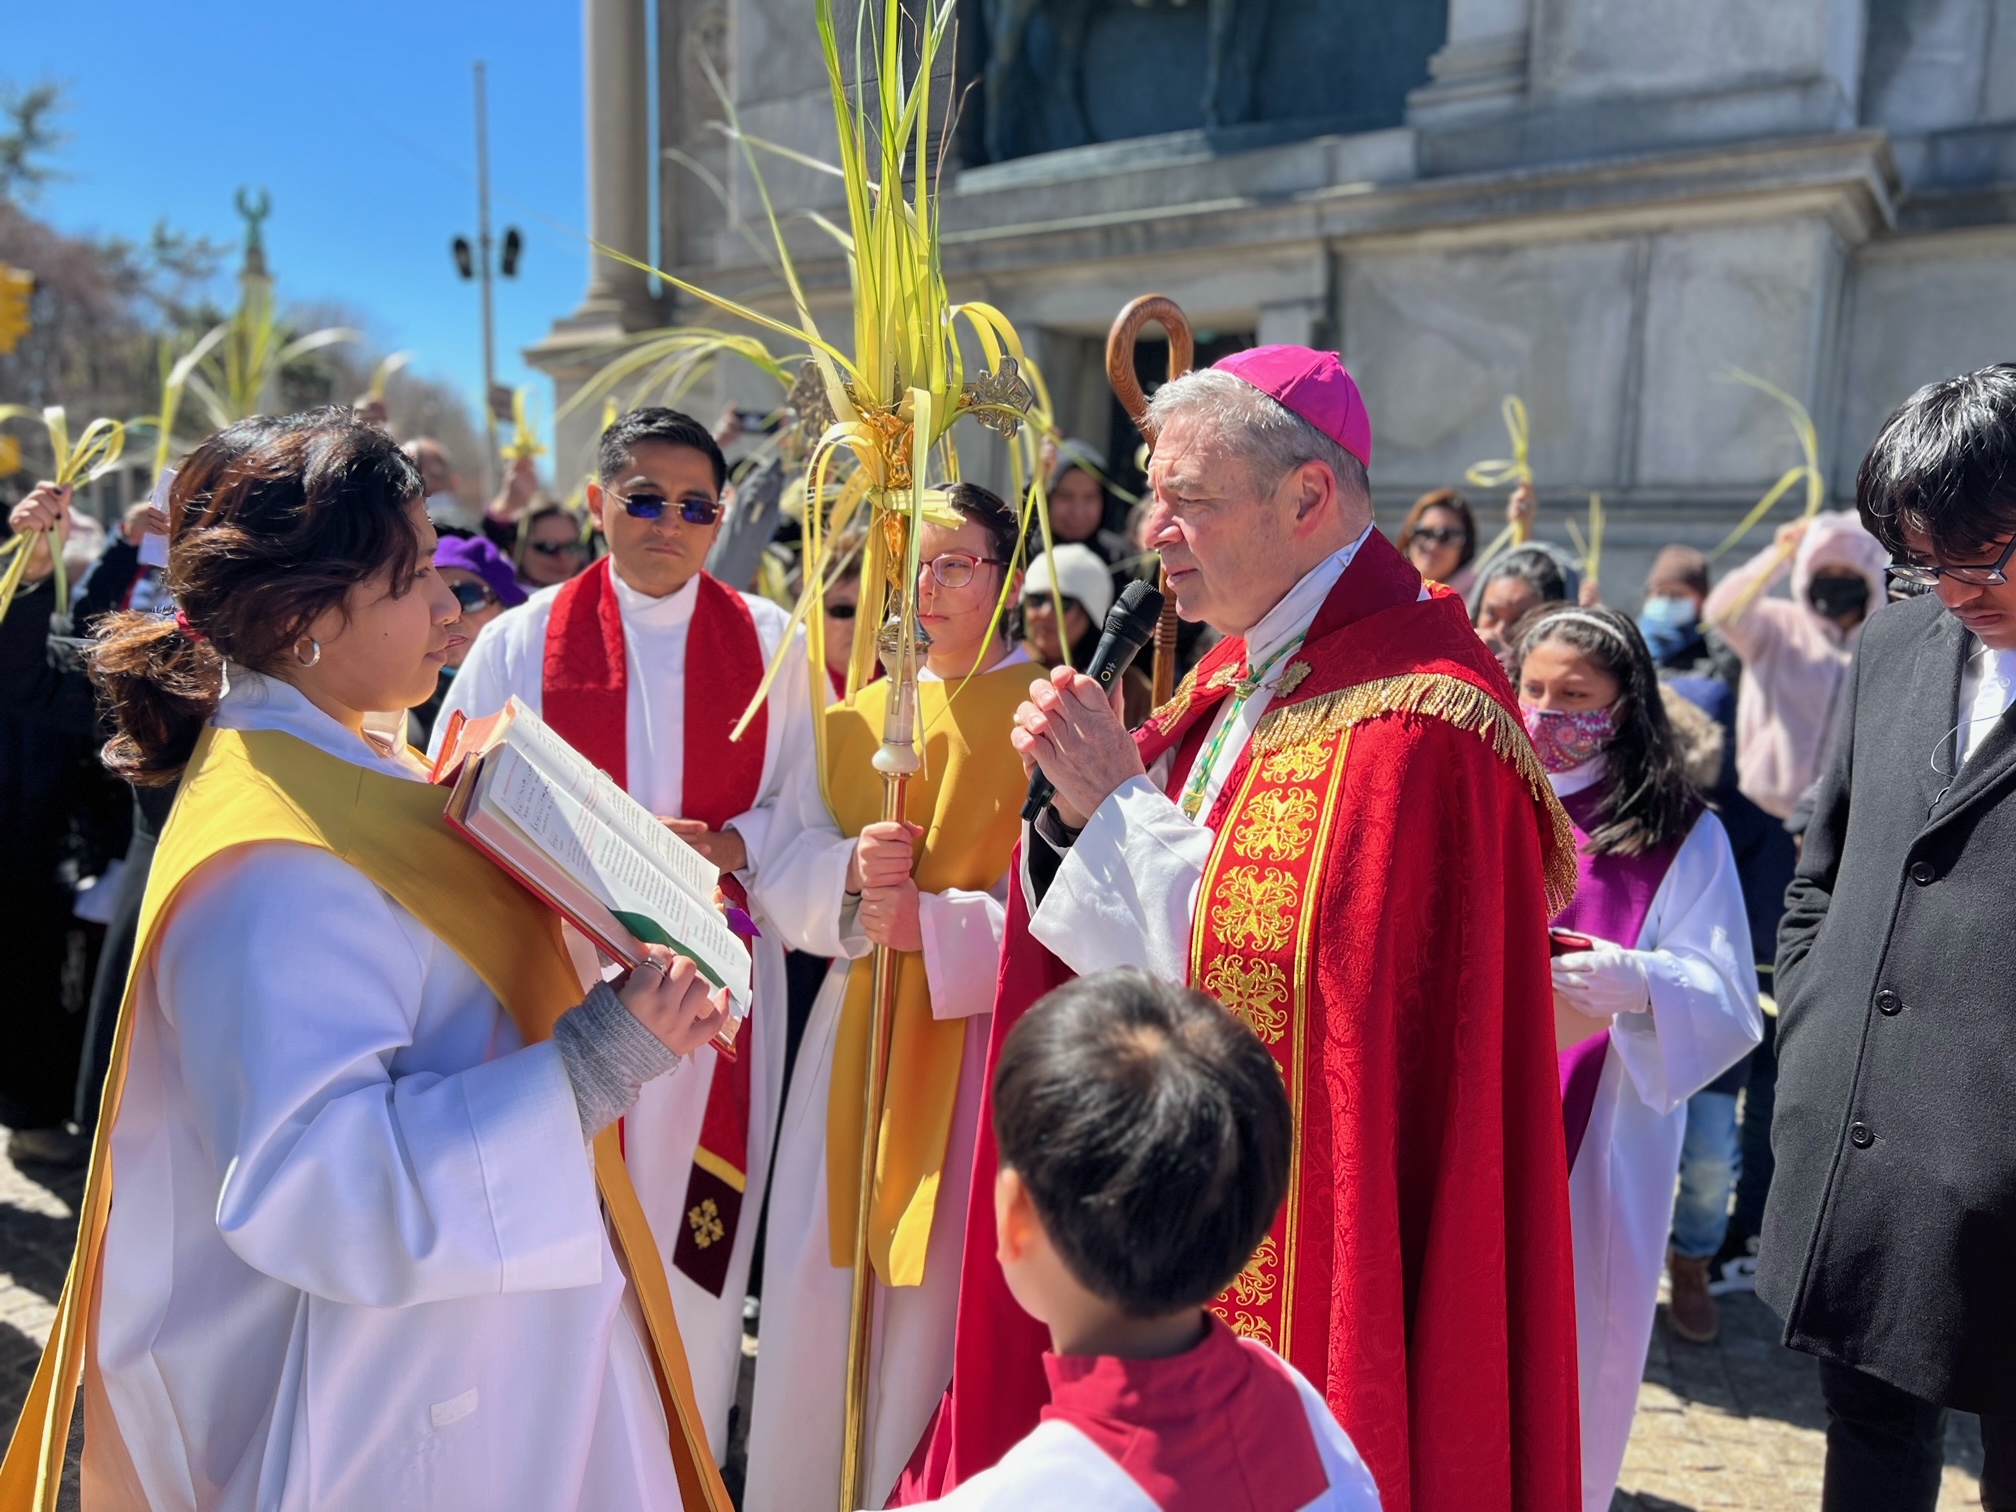 bishop-brennan-leads-palm-sunday-processions-in-brooklyn-diocese-of